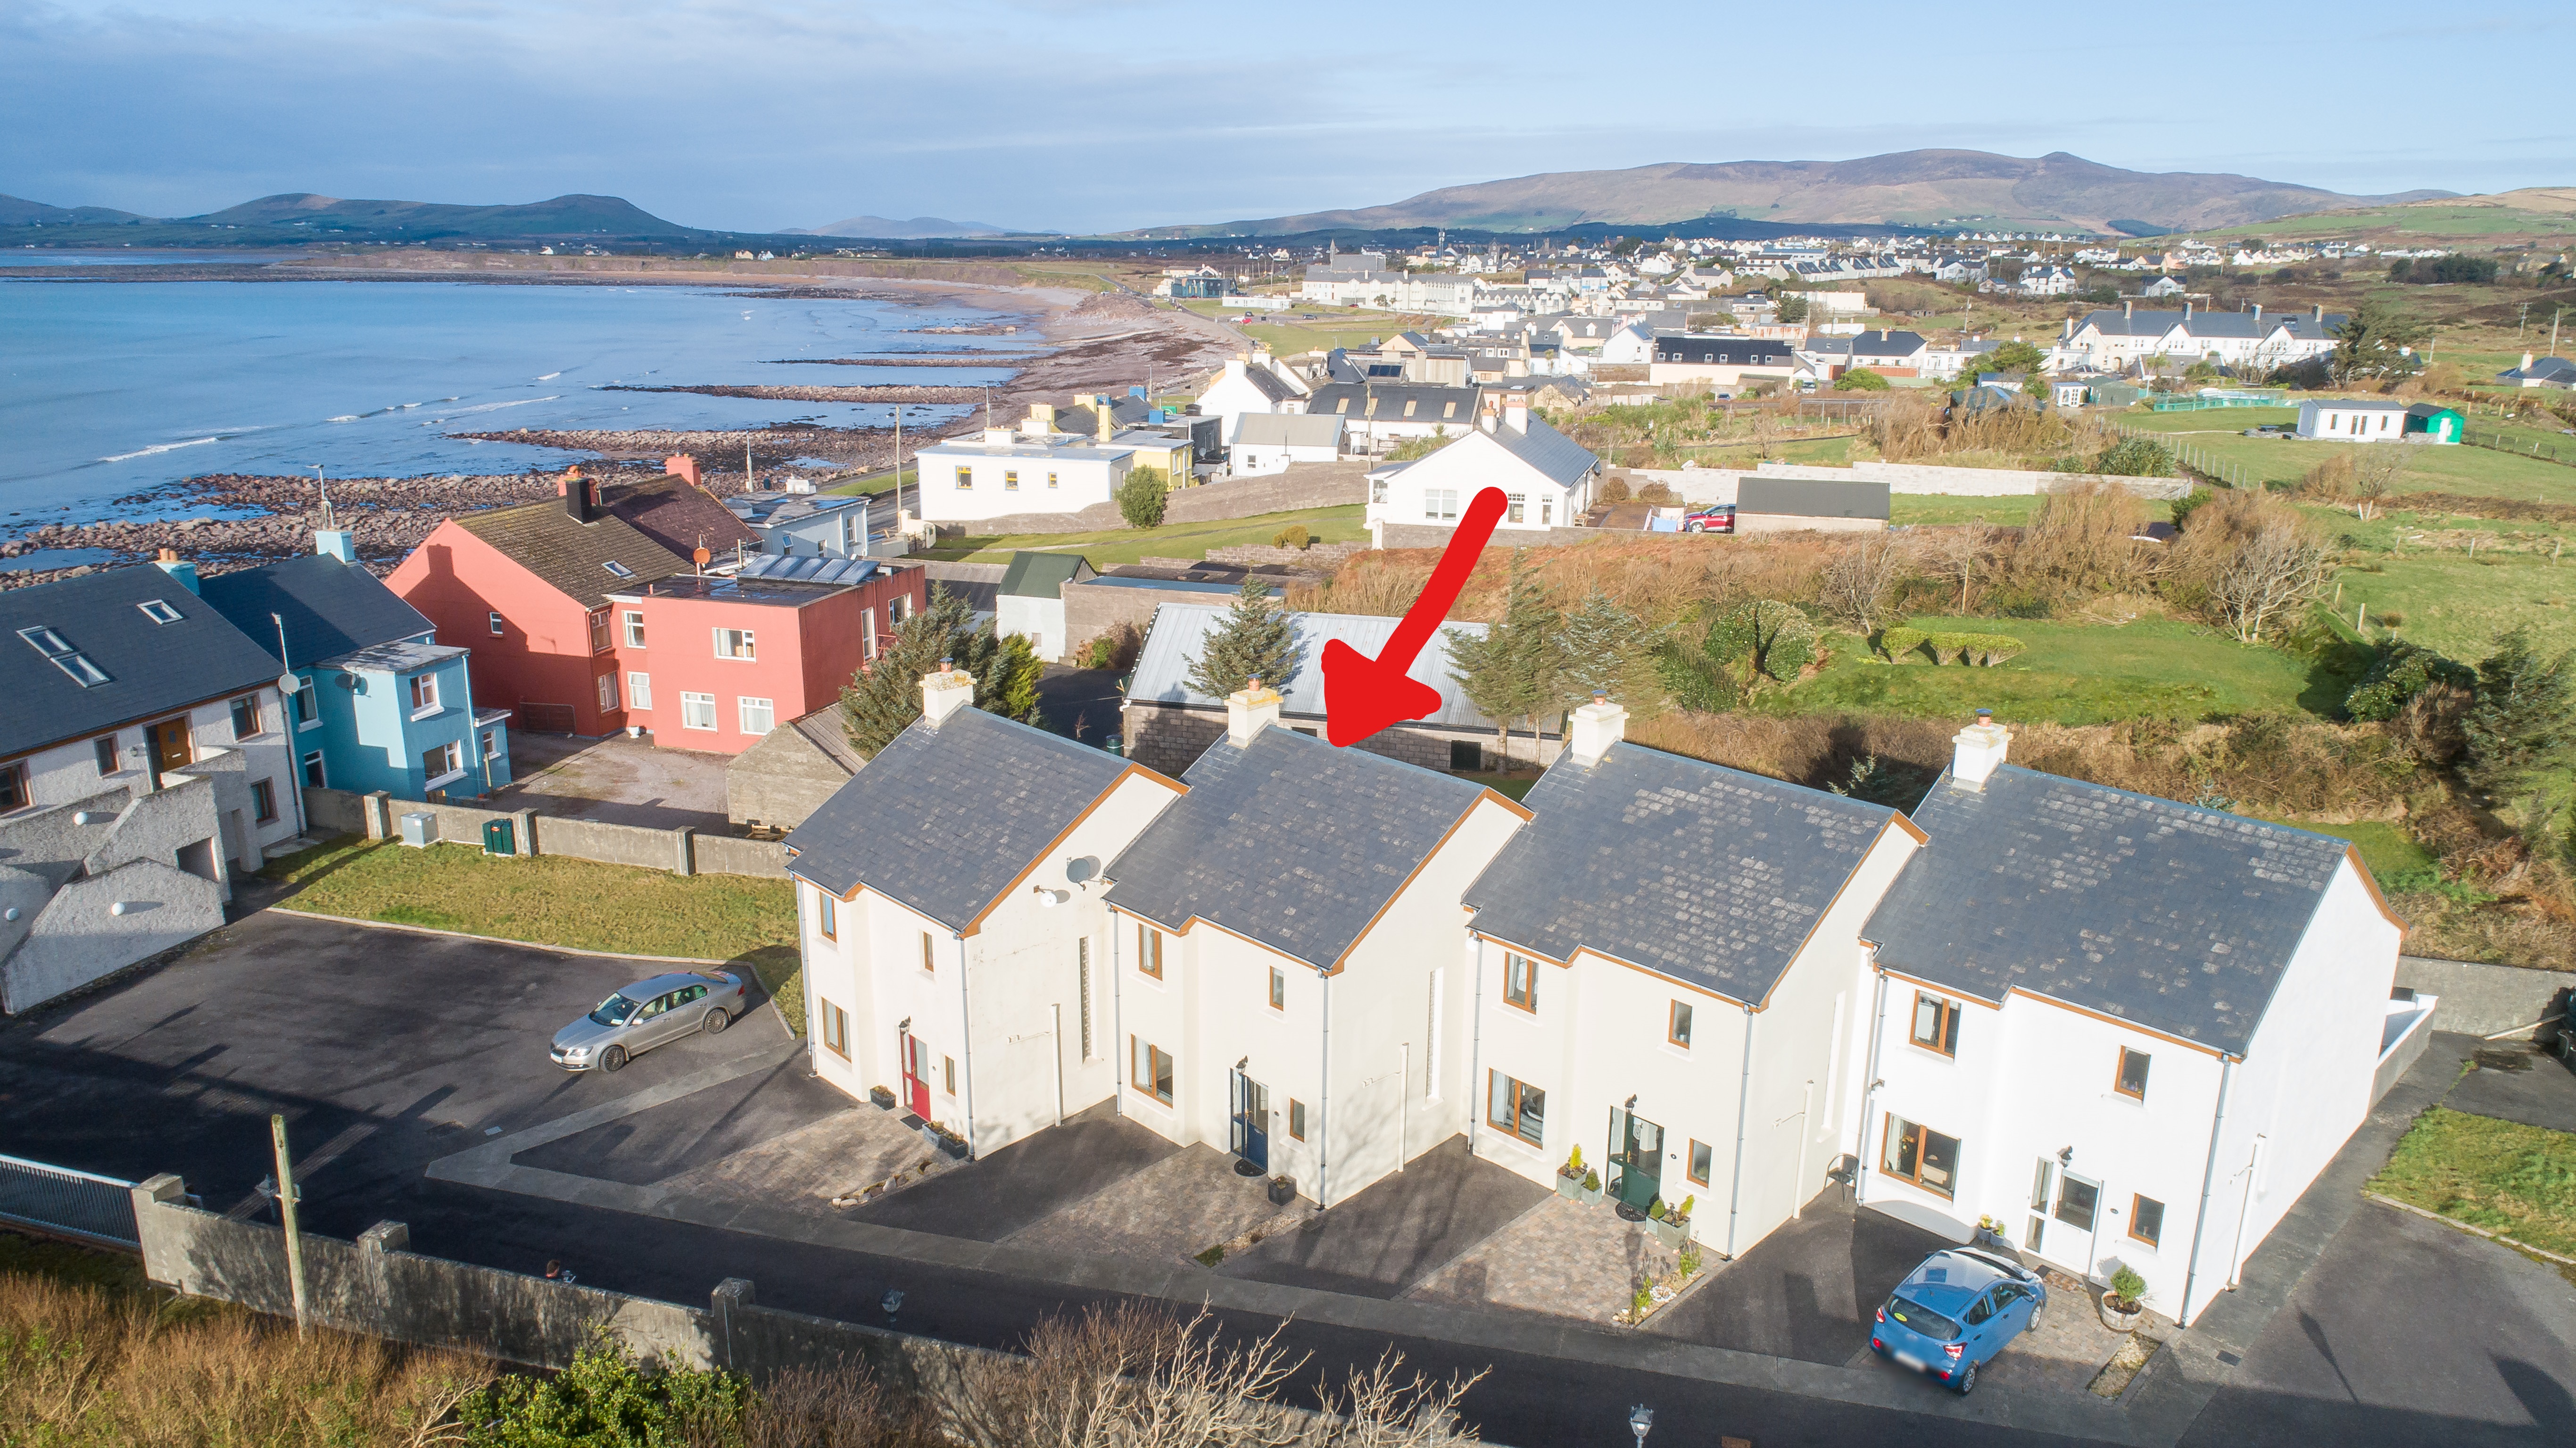 FOR SALE ~ House No 2 Cois Farraige Waterville – V23 W298 – Turn Key property.